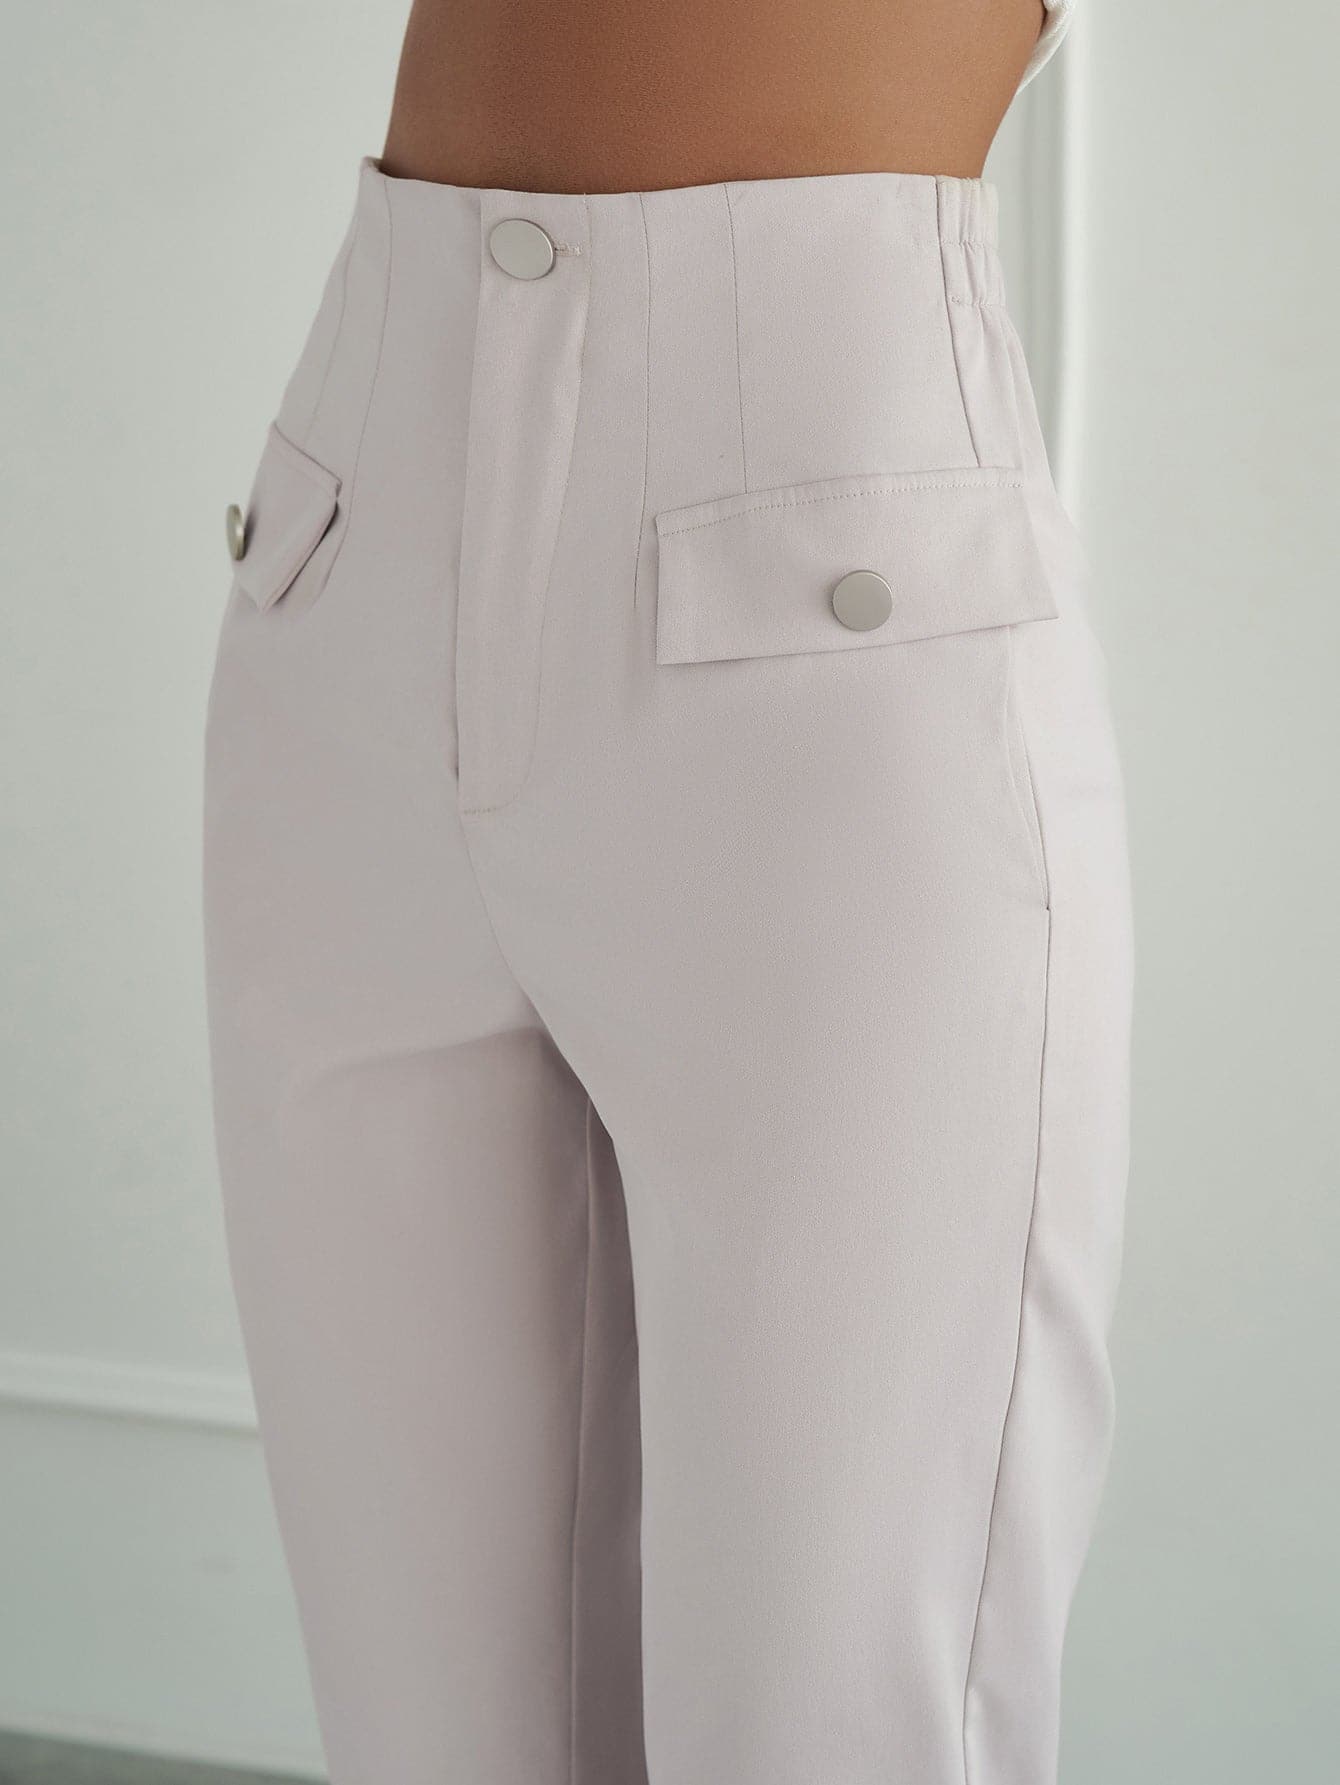 Buttoned Elastic Detail Cuffed Pants - Love culture store